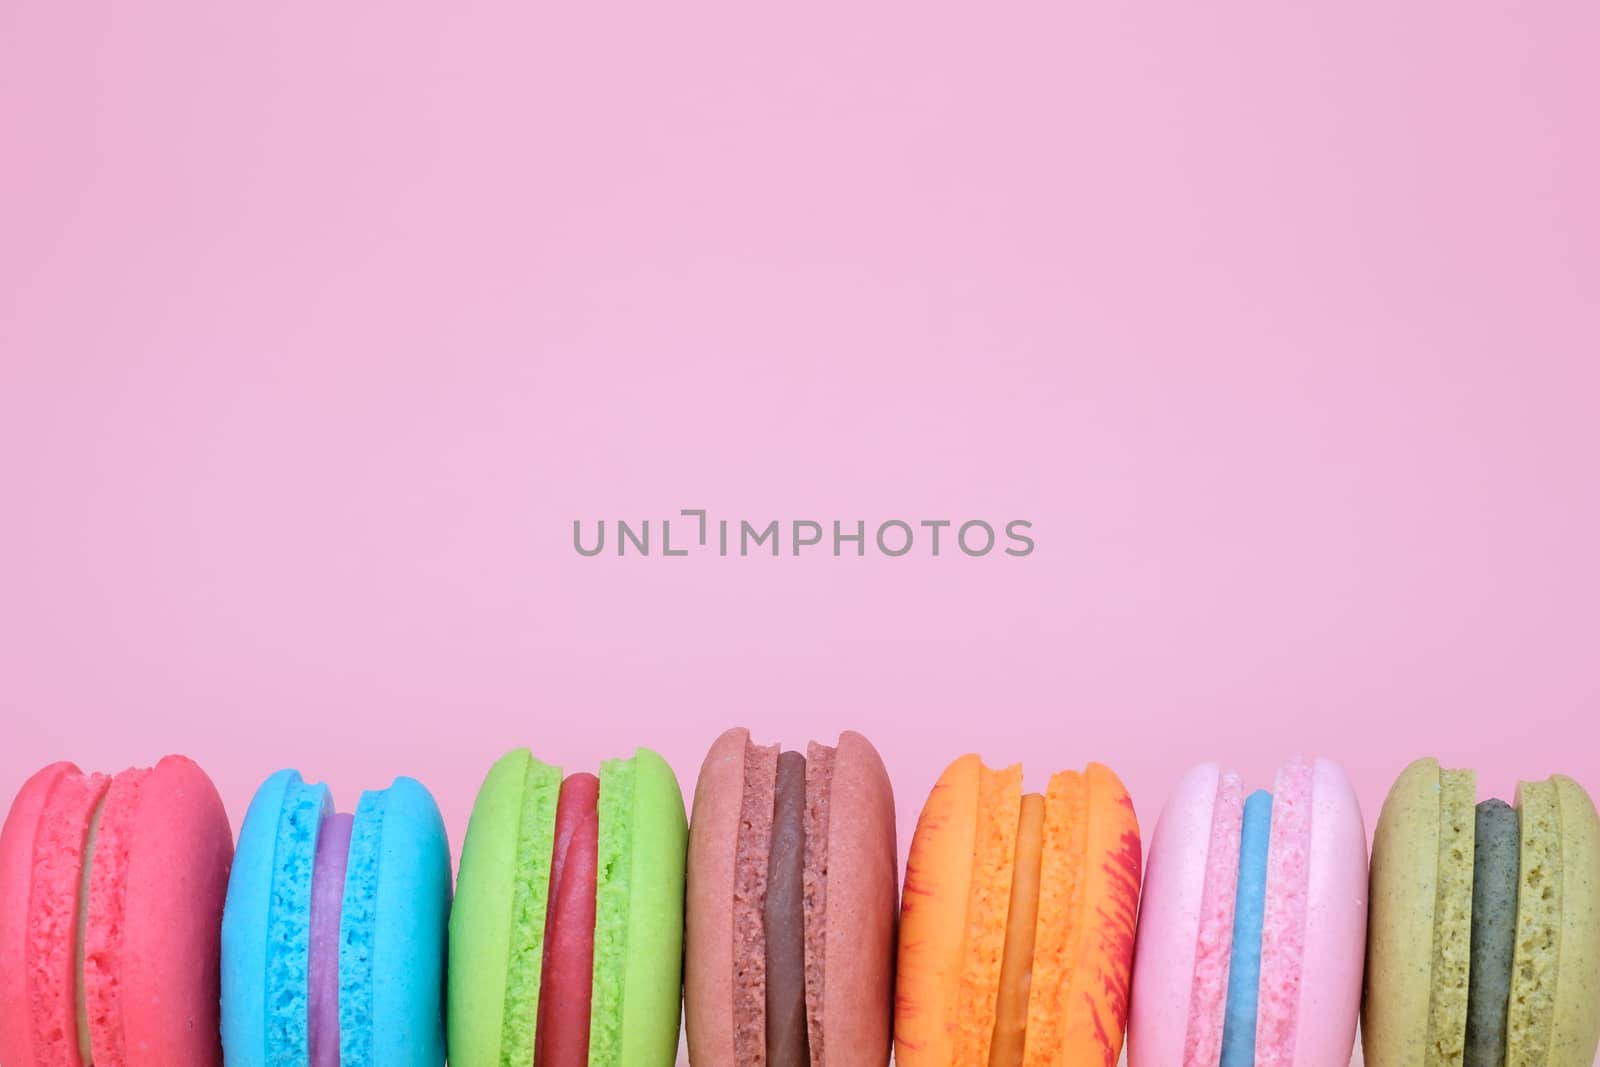 Sweet and colourful french macaroons on pastel pink background